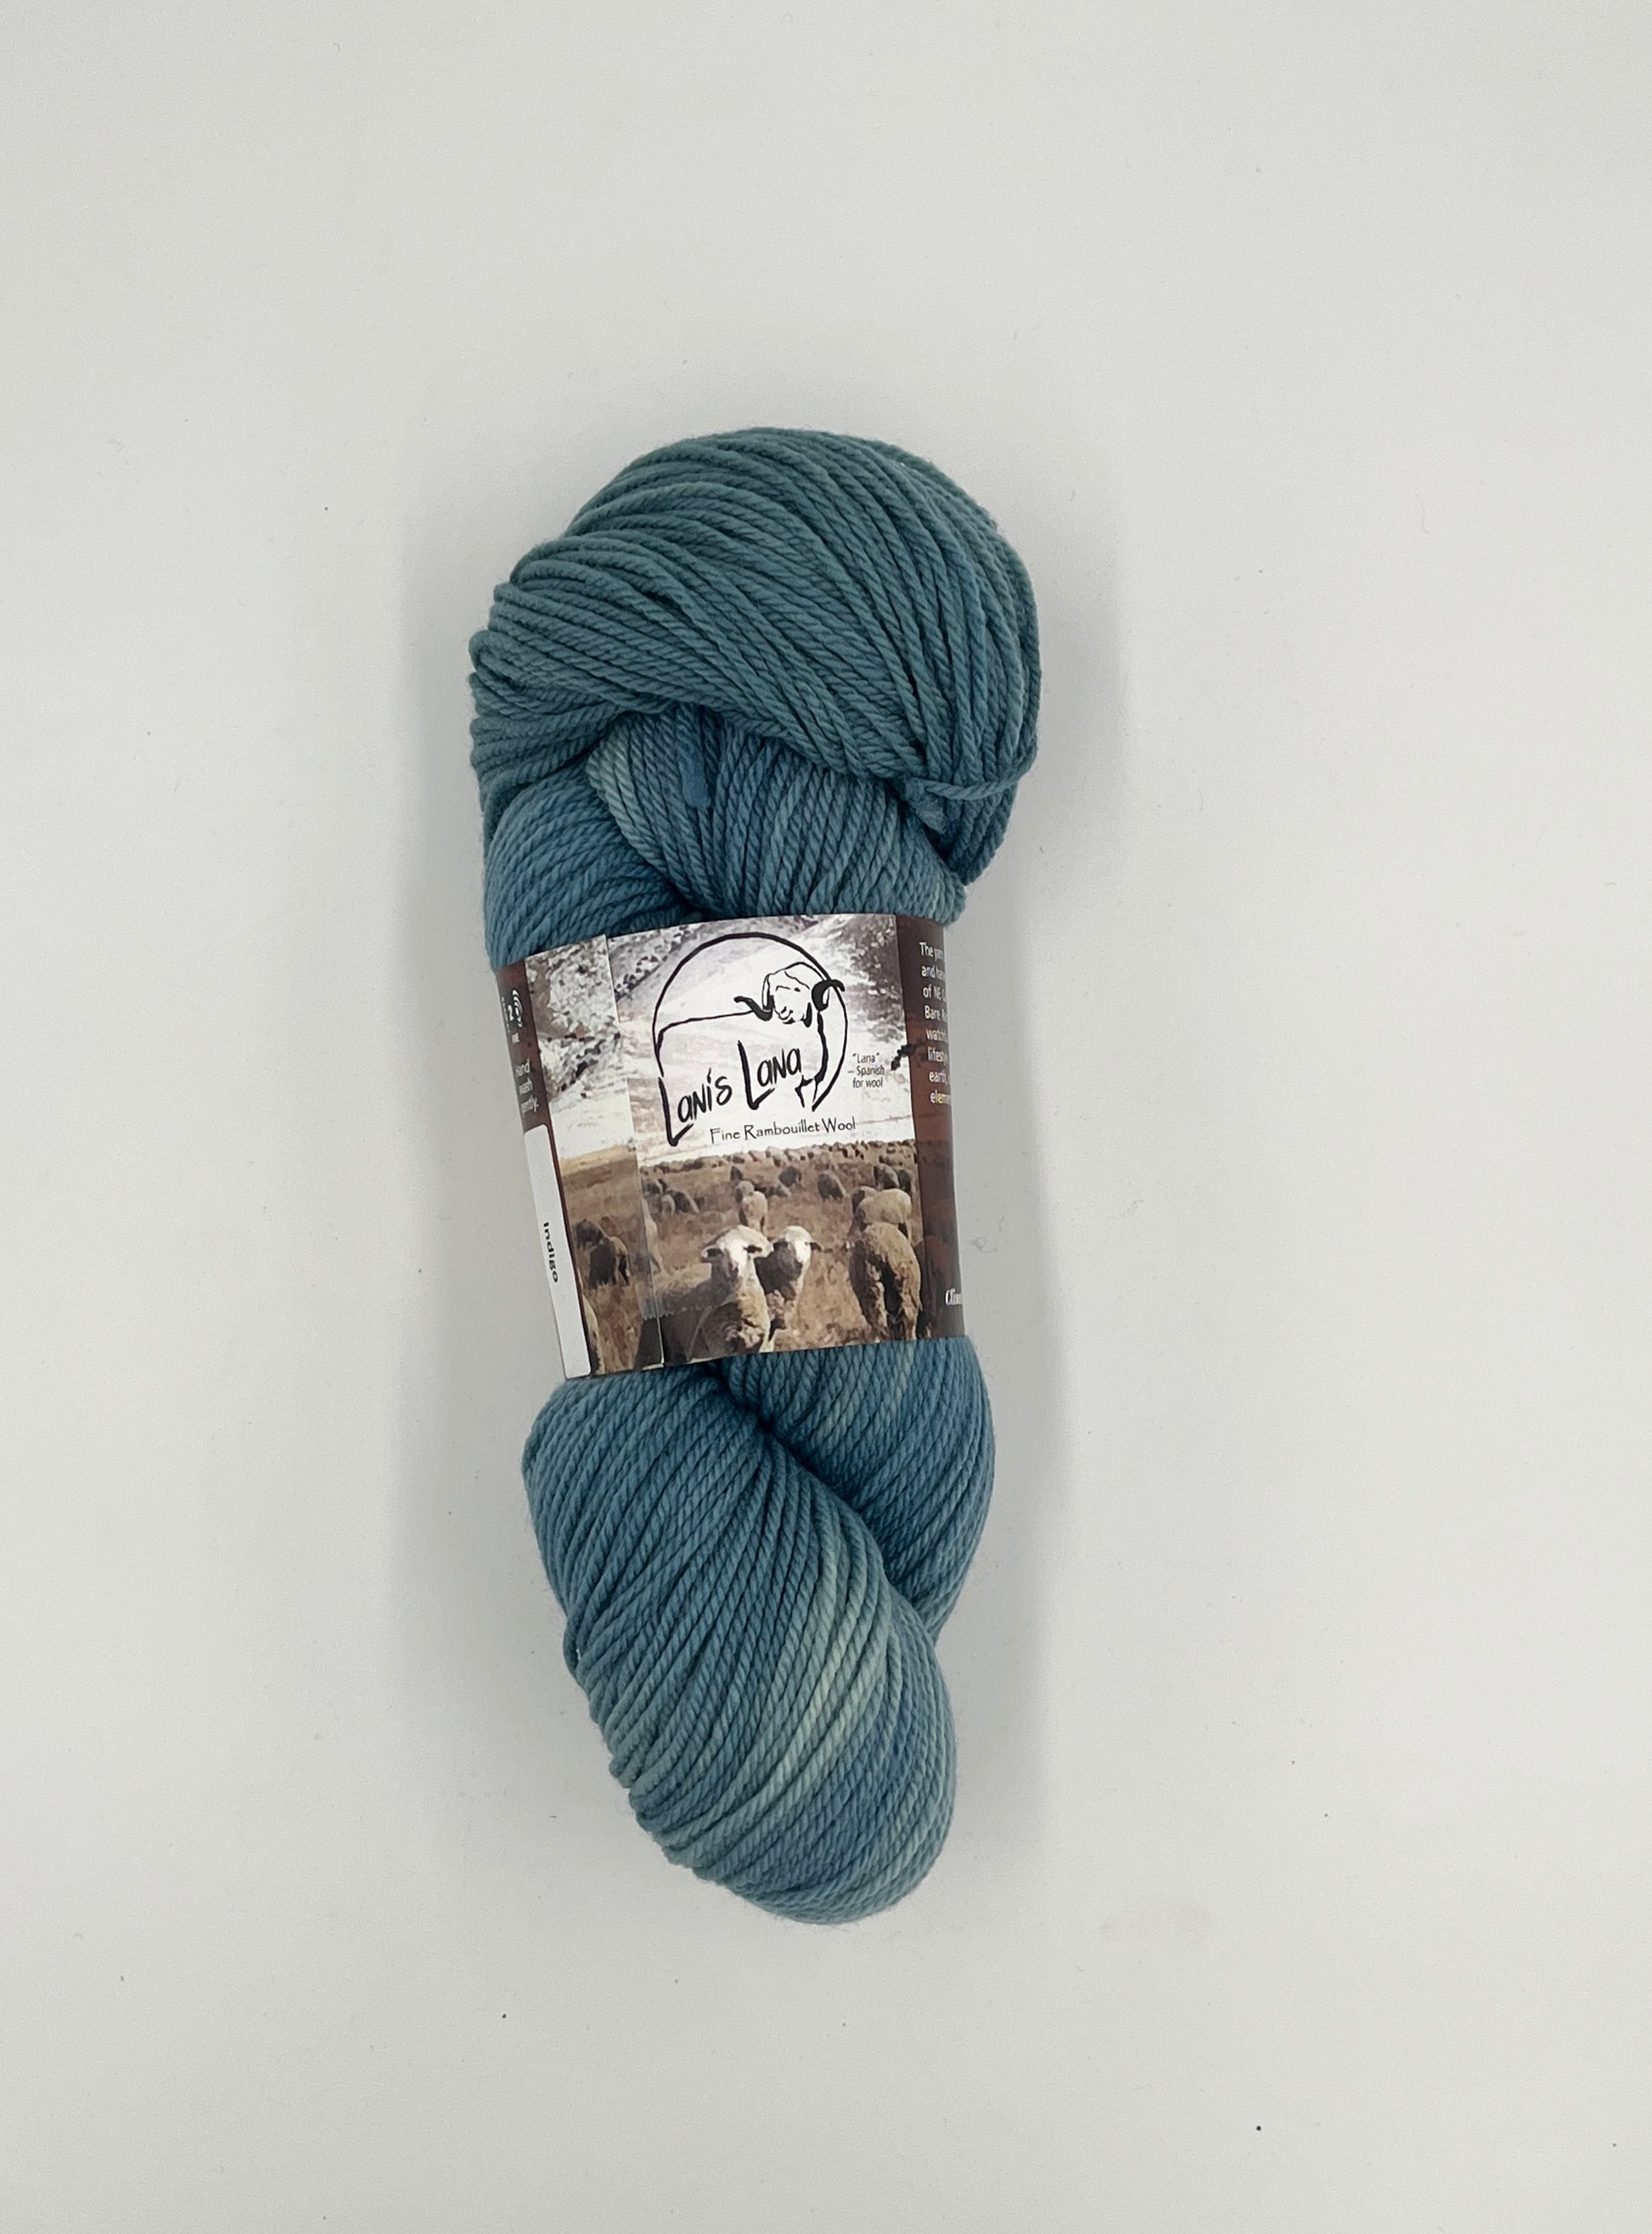 Buffalo Hills "Indigo" Botanically Dyed Sport weight yarn on a Climate Beneficial Wool Base Yarn. 4 0z 3-ply skeins made and sourced in the USA. Semi-solid dyed in house with natural Indigo.